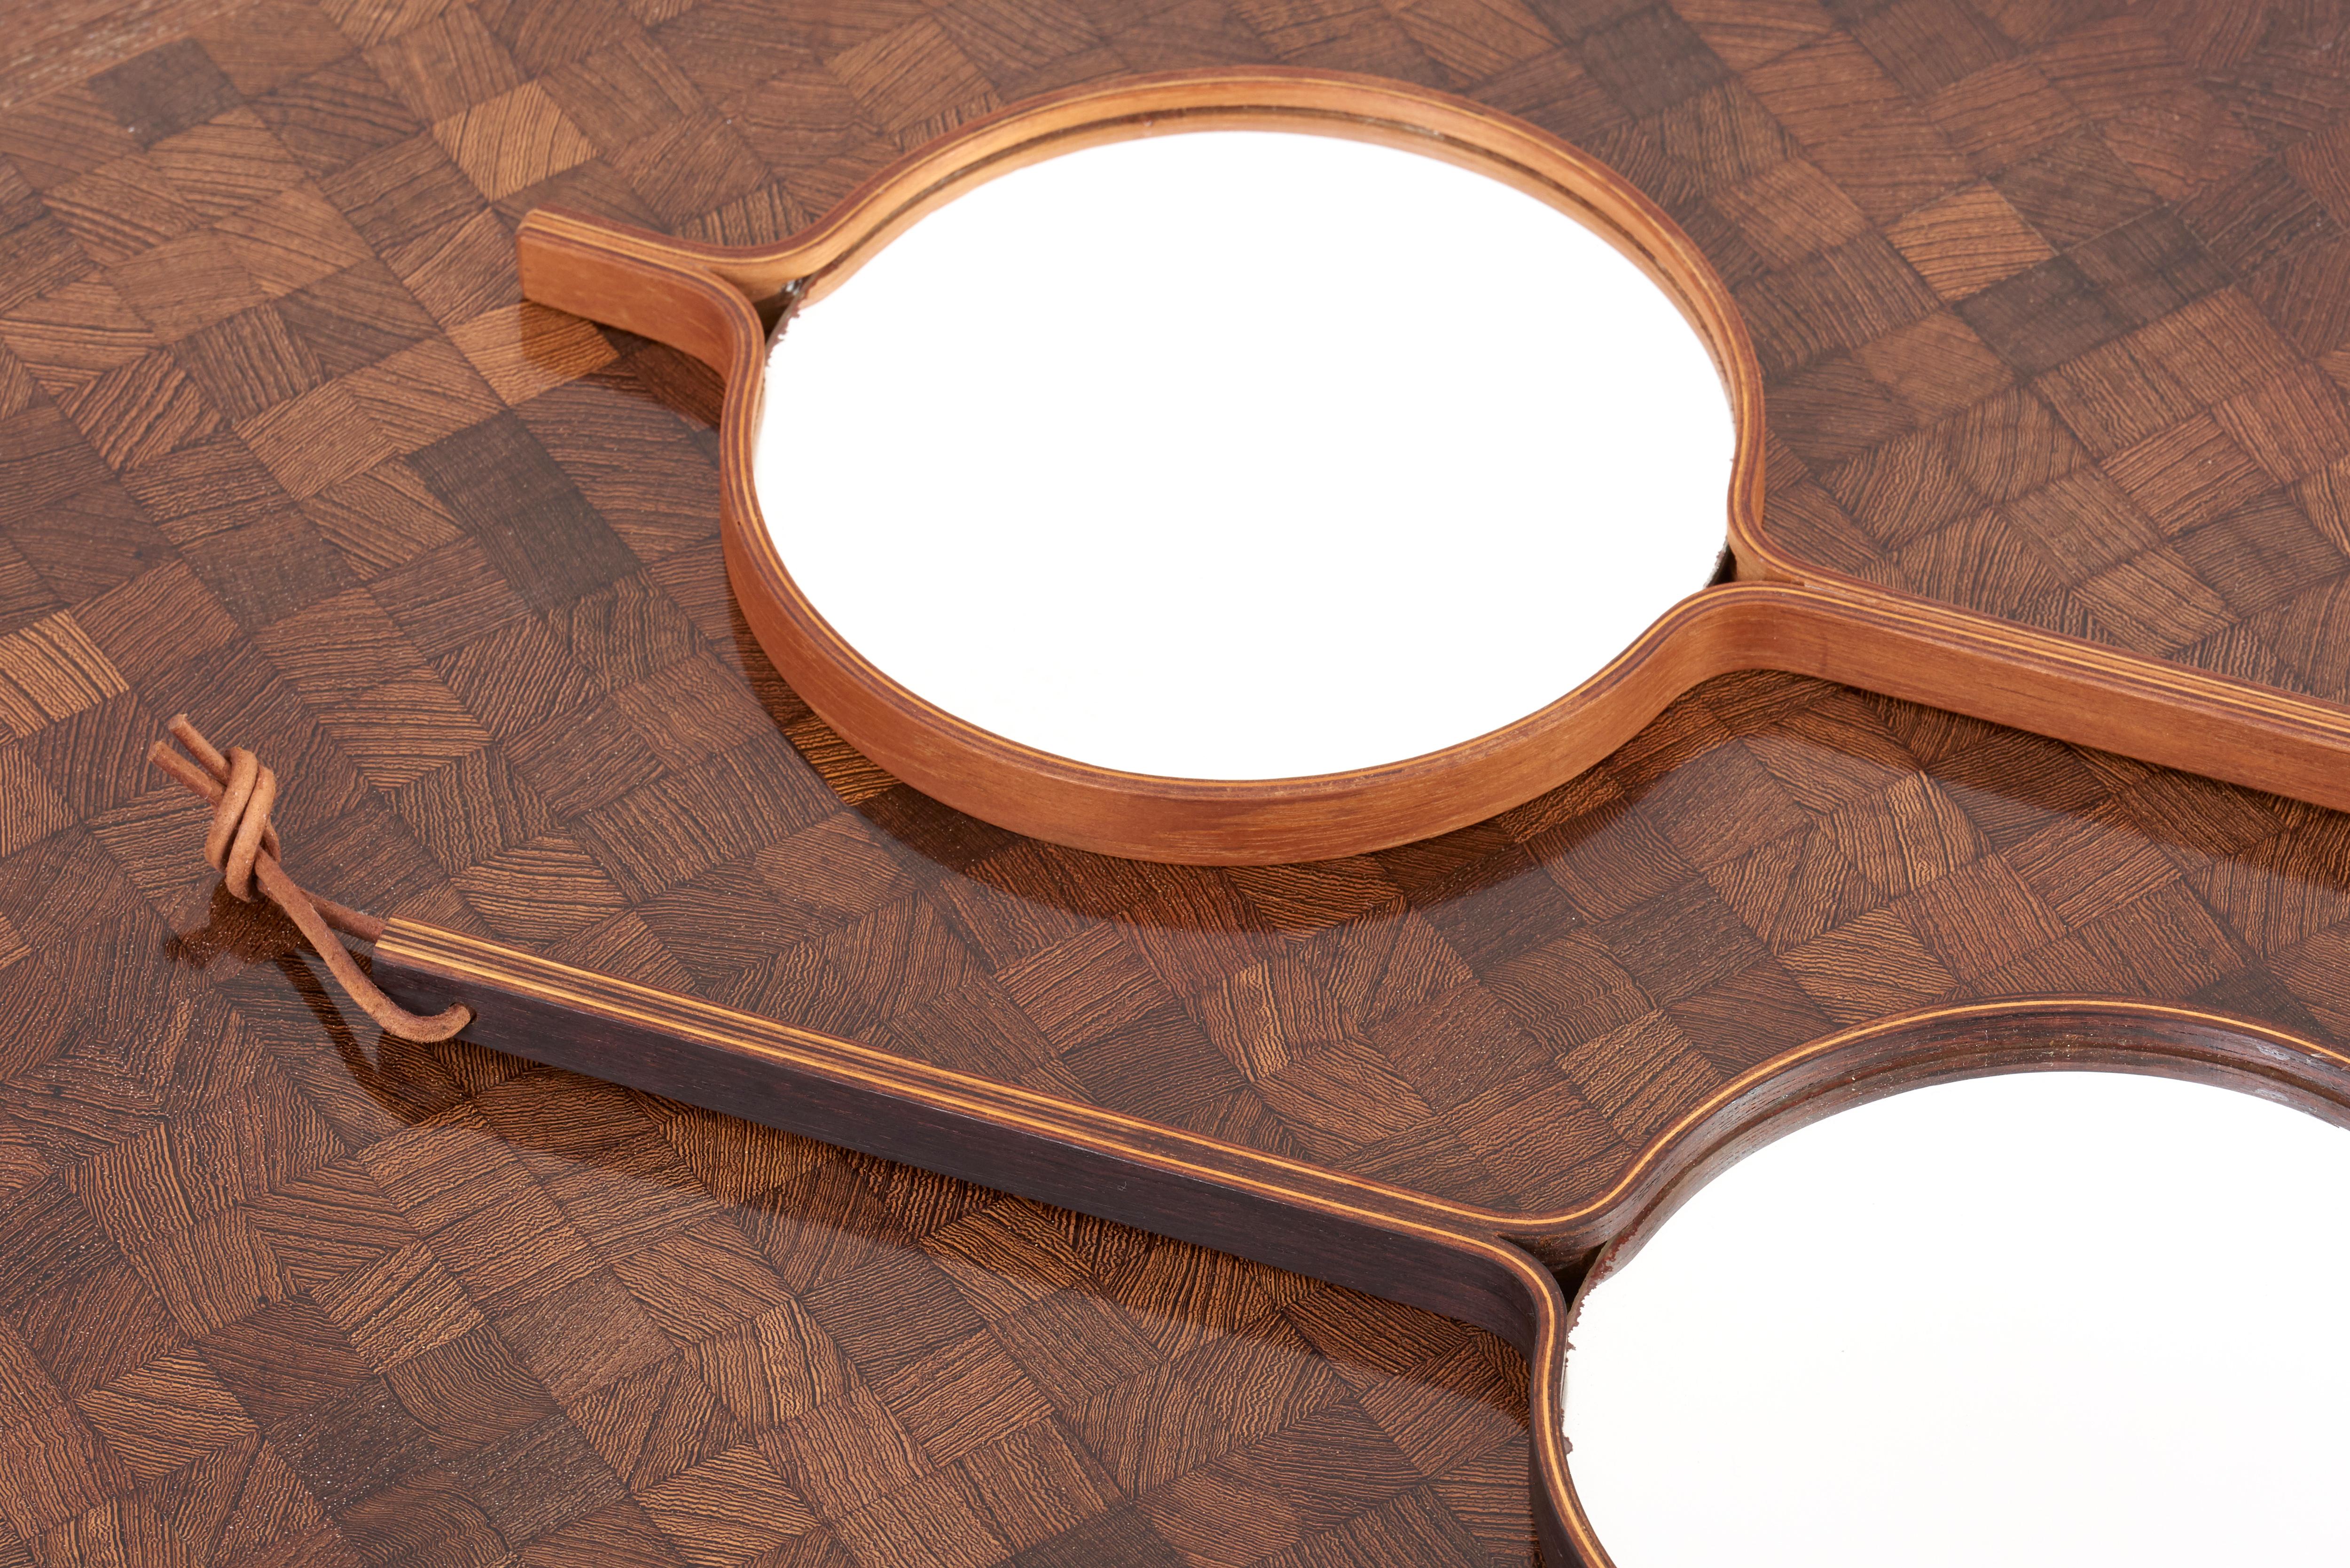 A mirror in ebonized wood and brass by Bech & Starup for Den Permanente, Copenhagen in 1960s.
It can be used both as a mirror to hand or as a wall hanging mirror.
4 pieces available.